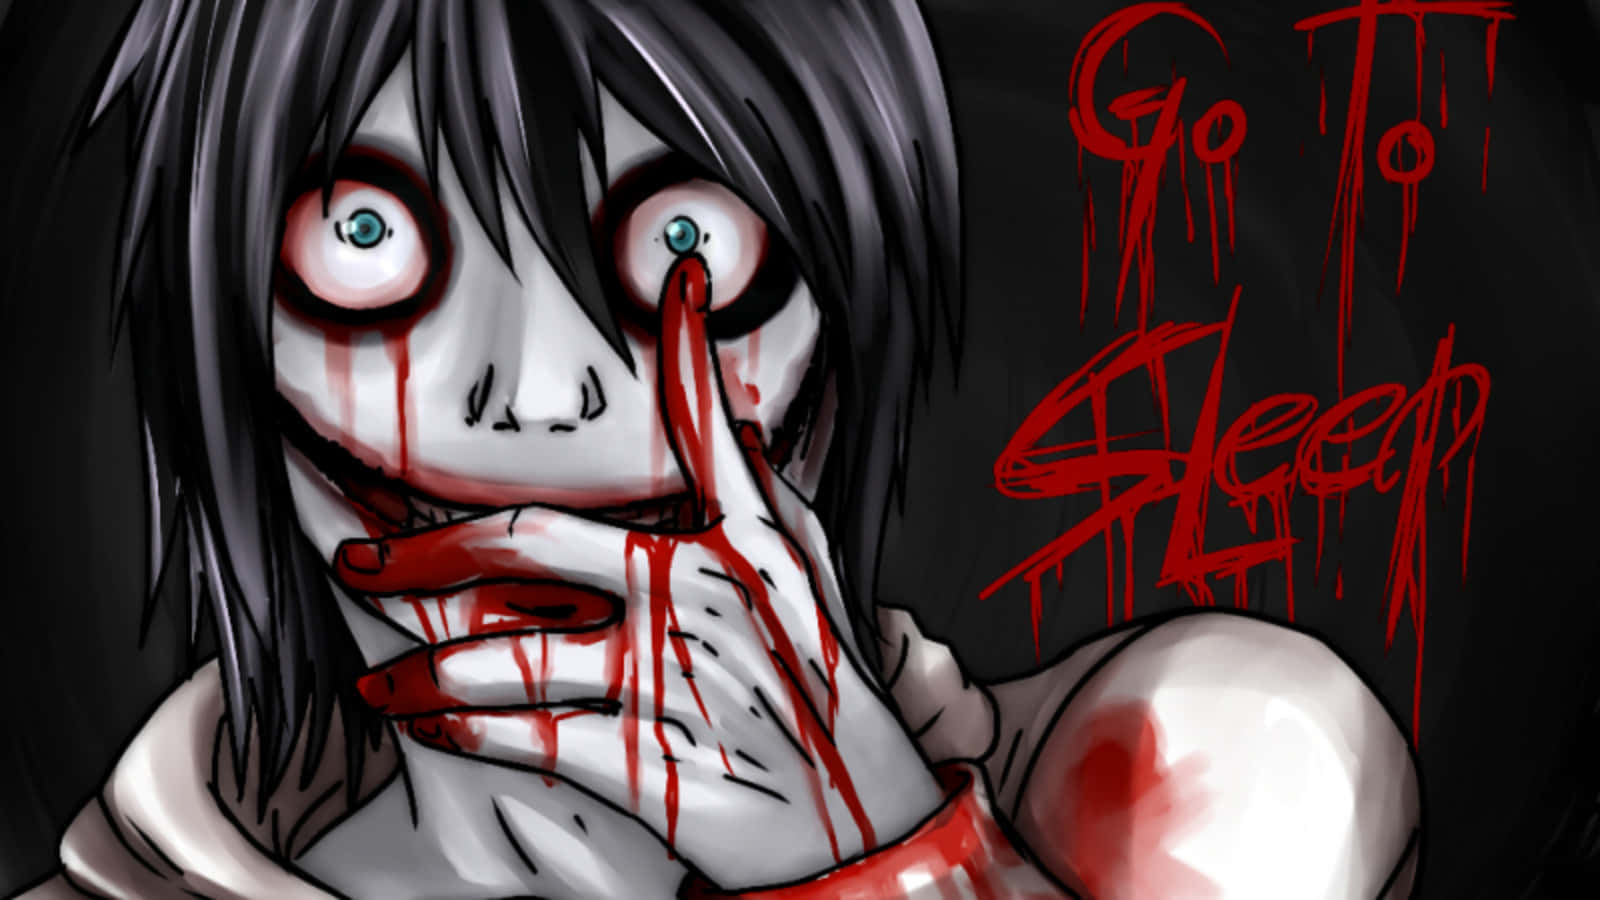 Jeff The Killer's Killings Have No End